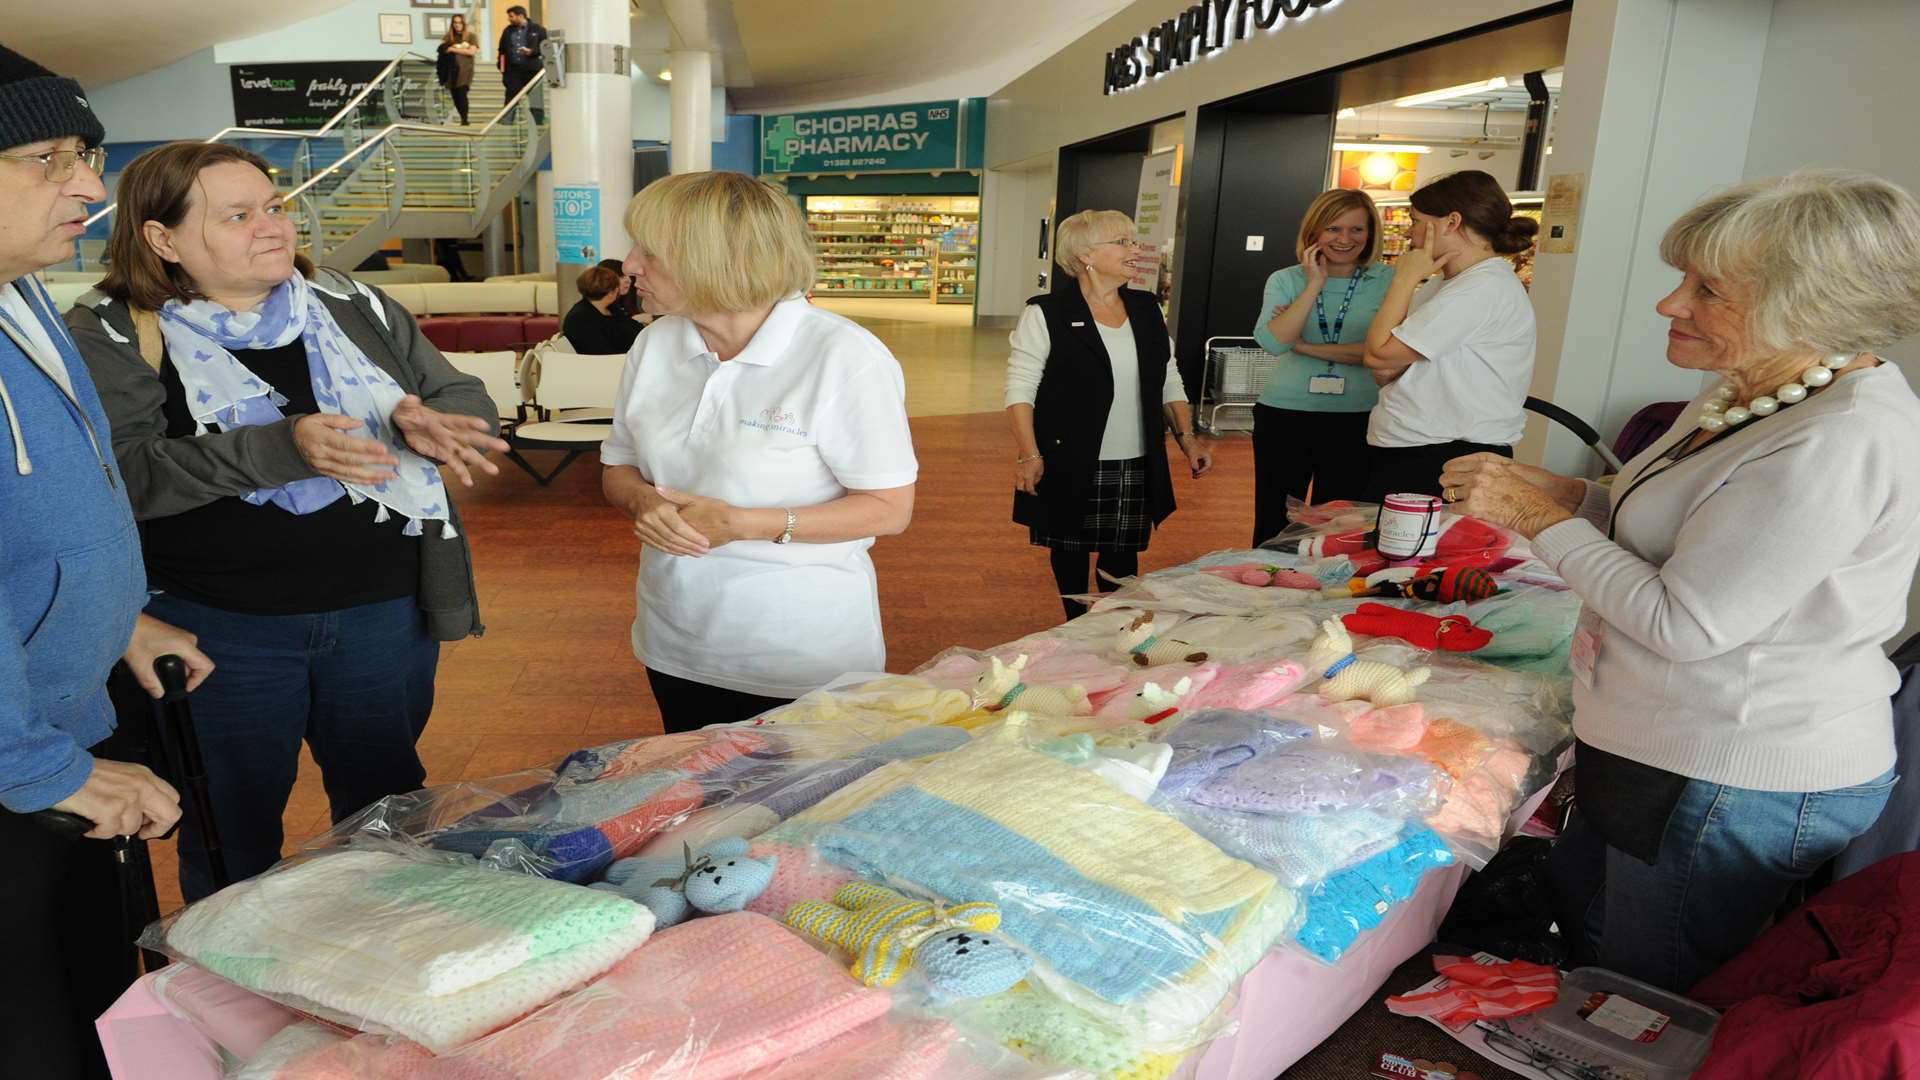 Darent Valley Hospital, Dartford. New Making Miracles charity stall in reception. Trish and Garry Chapman talk with Sally Howells (chairman) about knitting bedspreads for them.